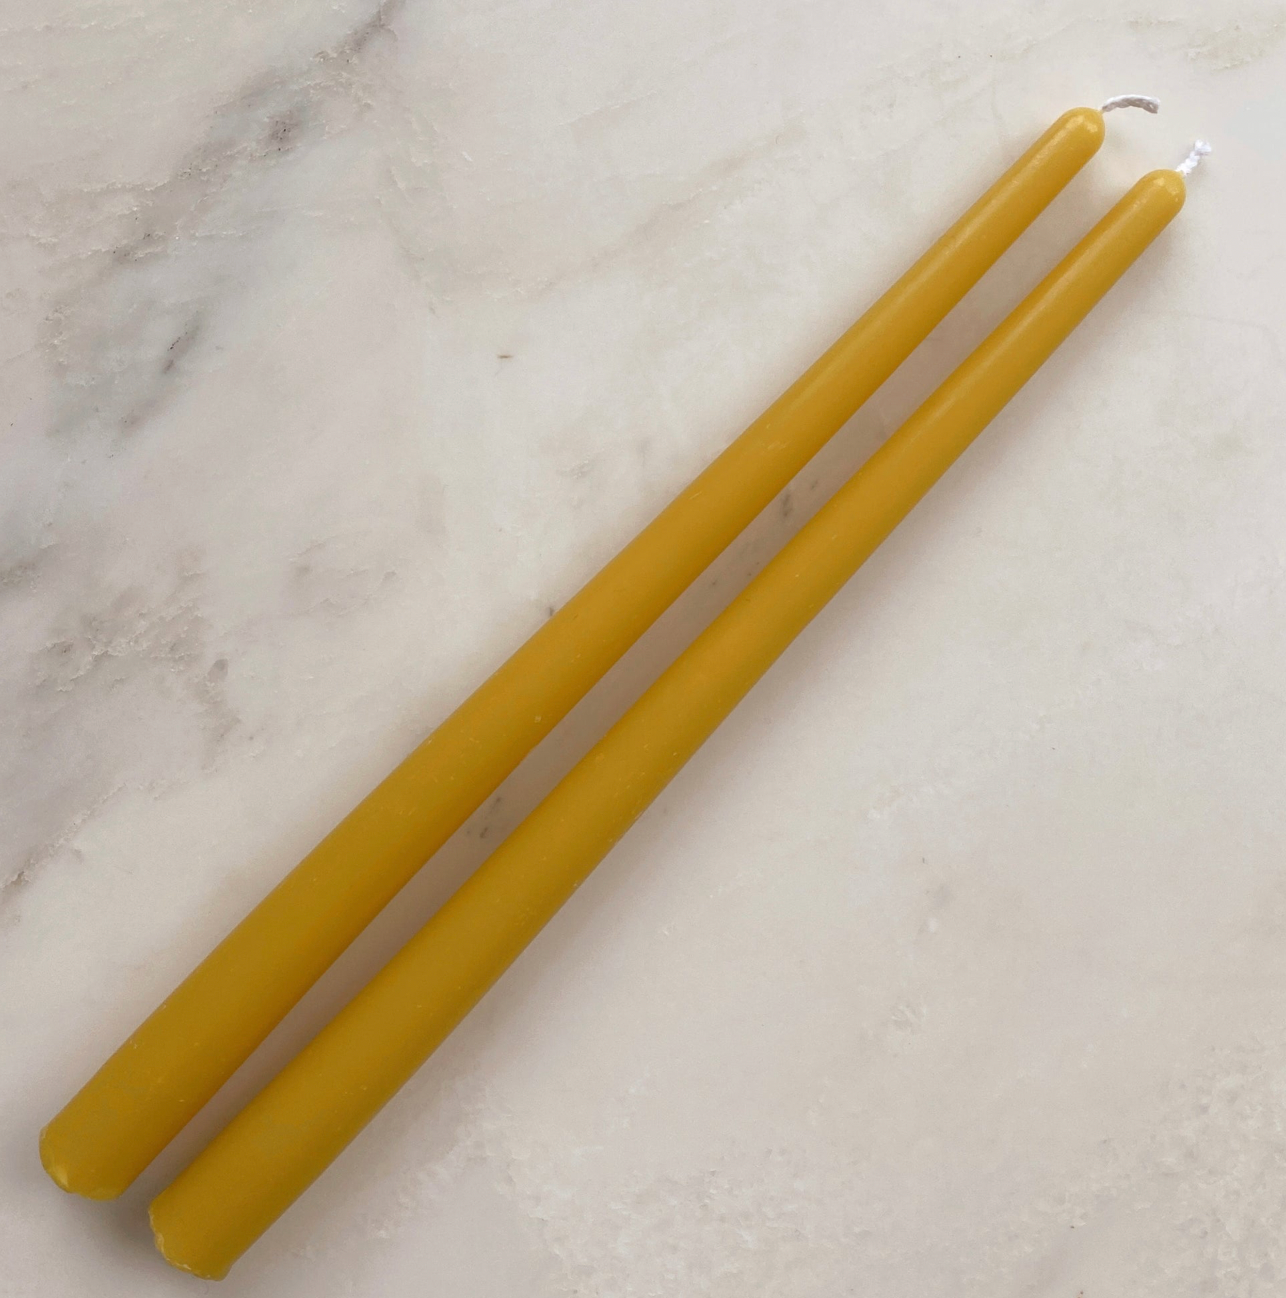 Mmann Candles - Magic Stix Beeswax Taper - Citrine Yellow - Set of Two